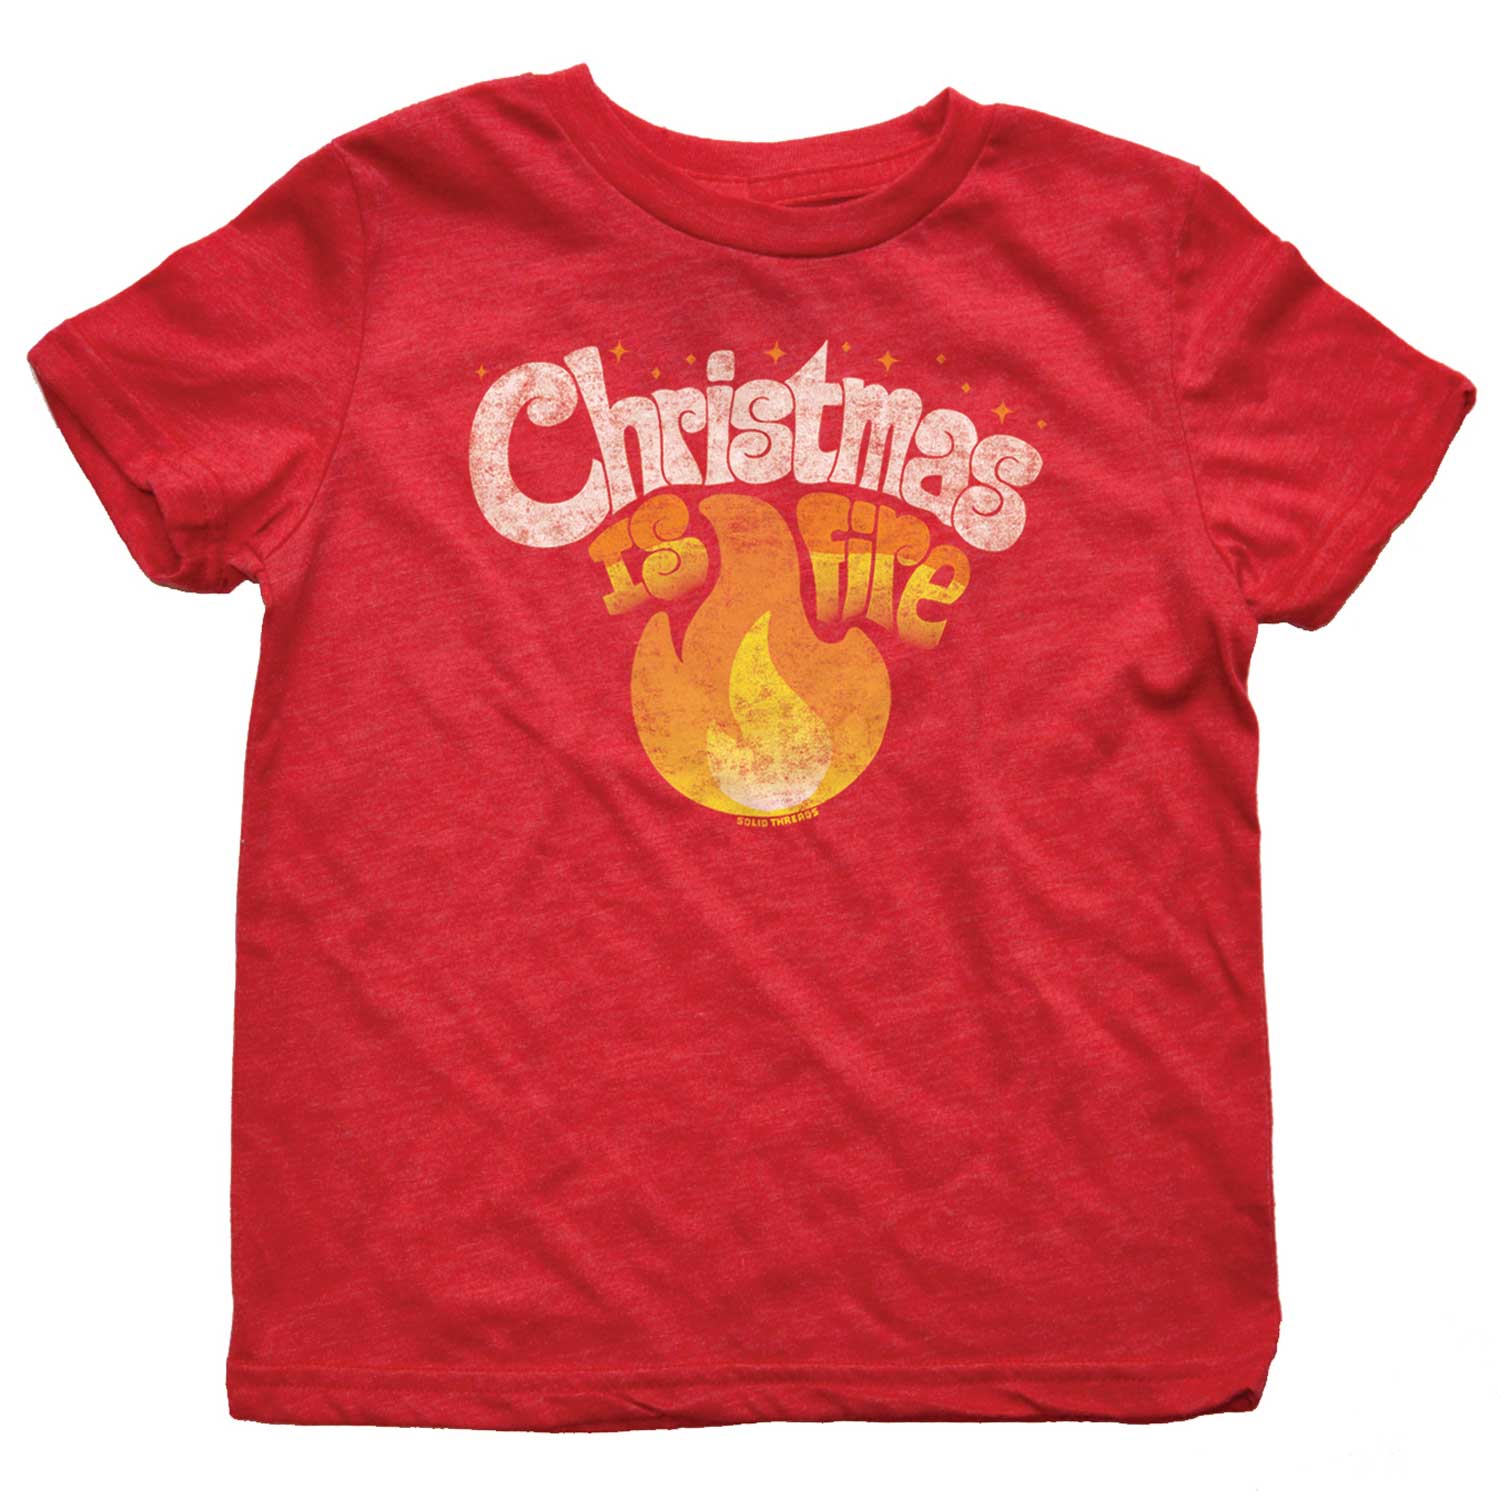 Kids Christmas Is Fire Retro Holiday Graphic T-Shirt | Funny Christmas Party Tee | Solid Threads